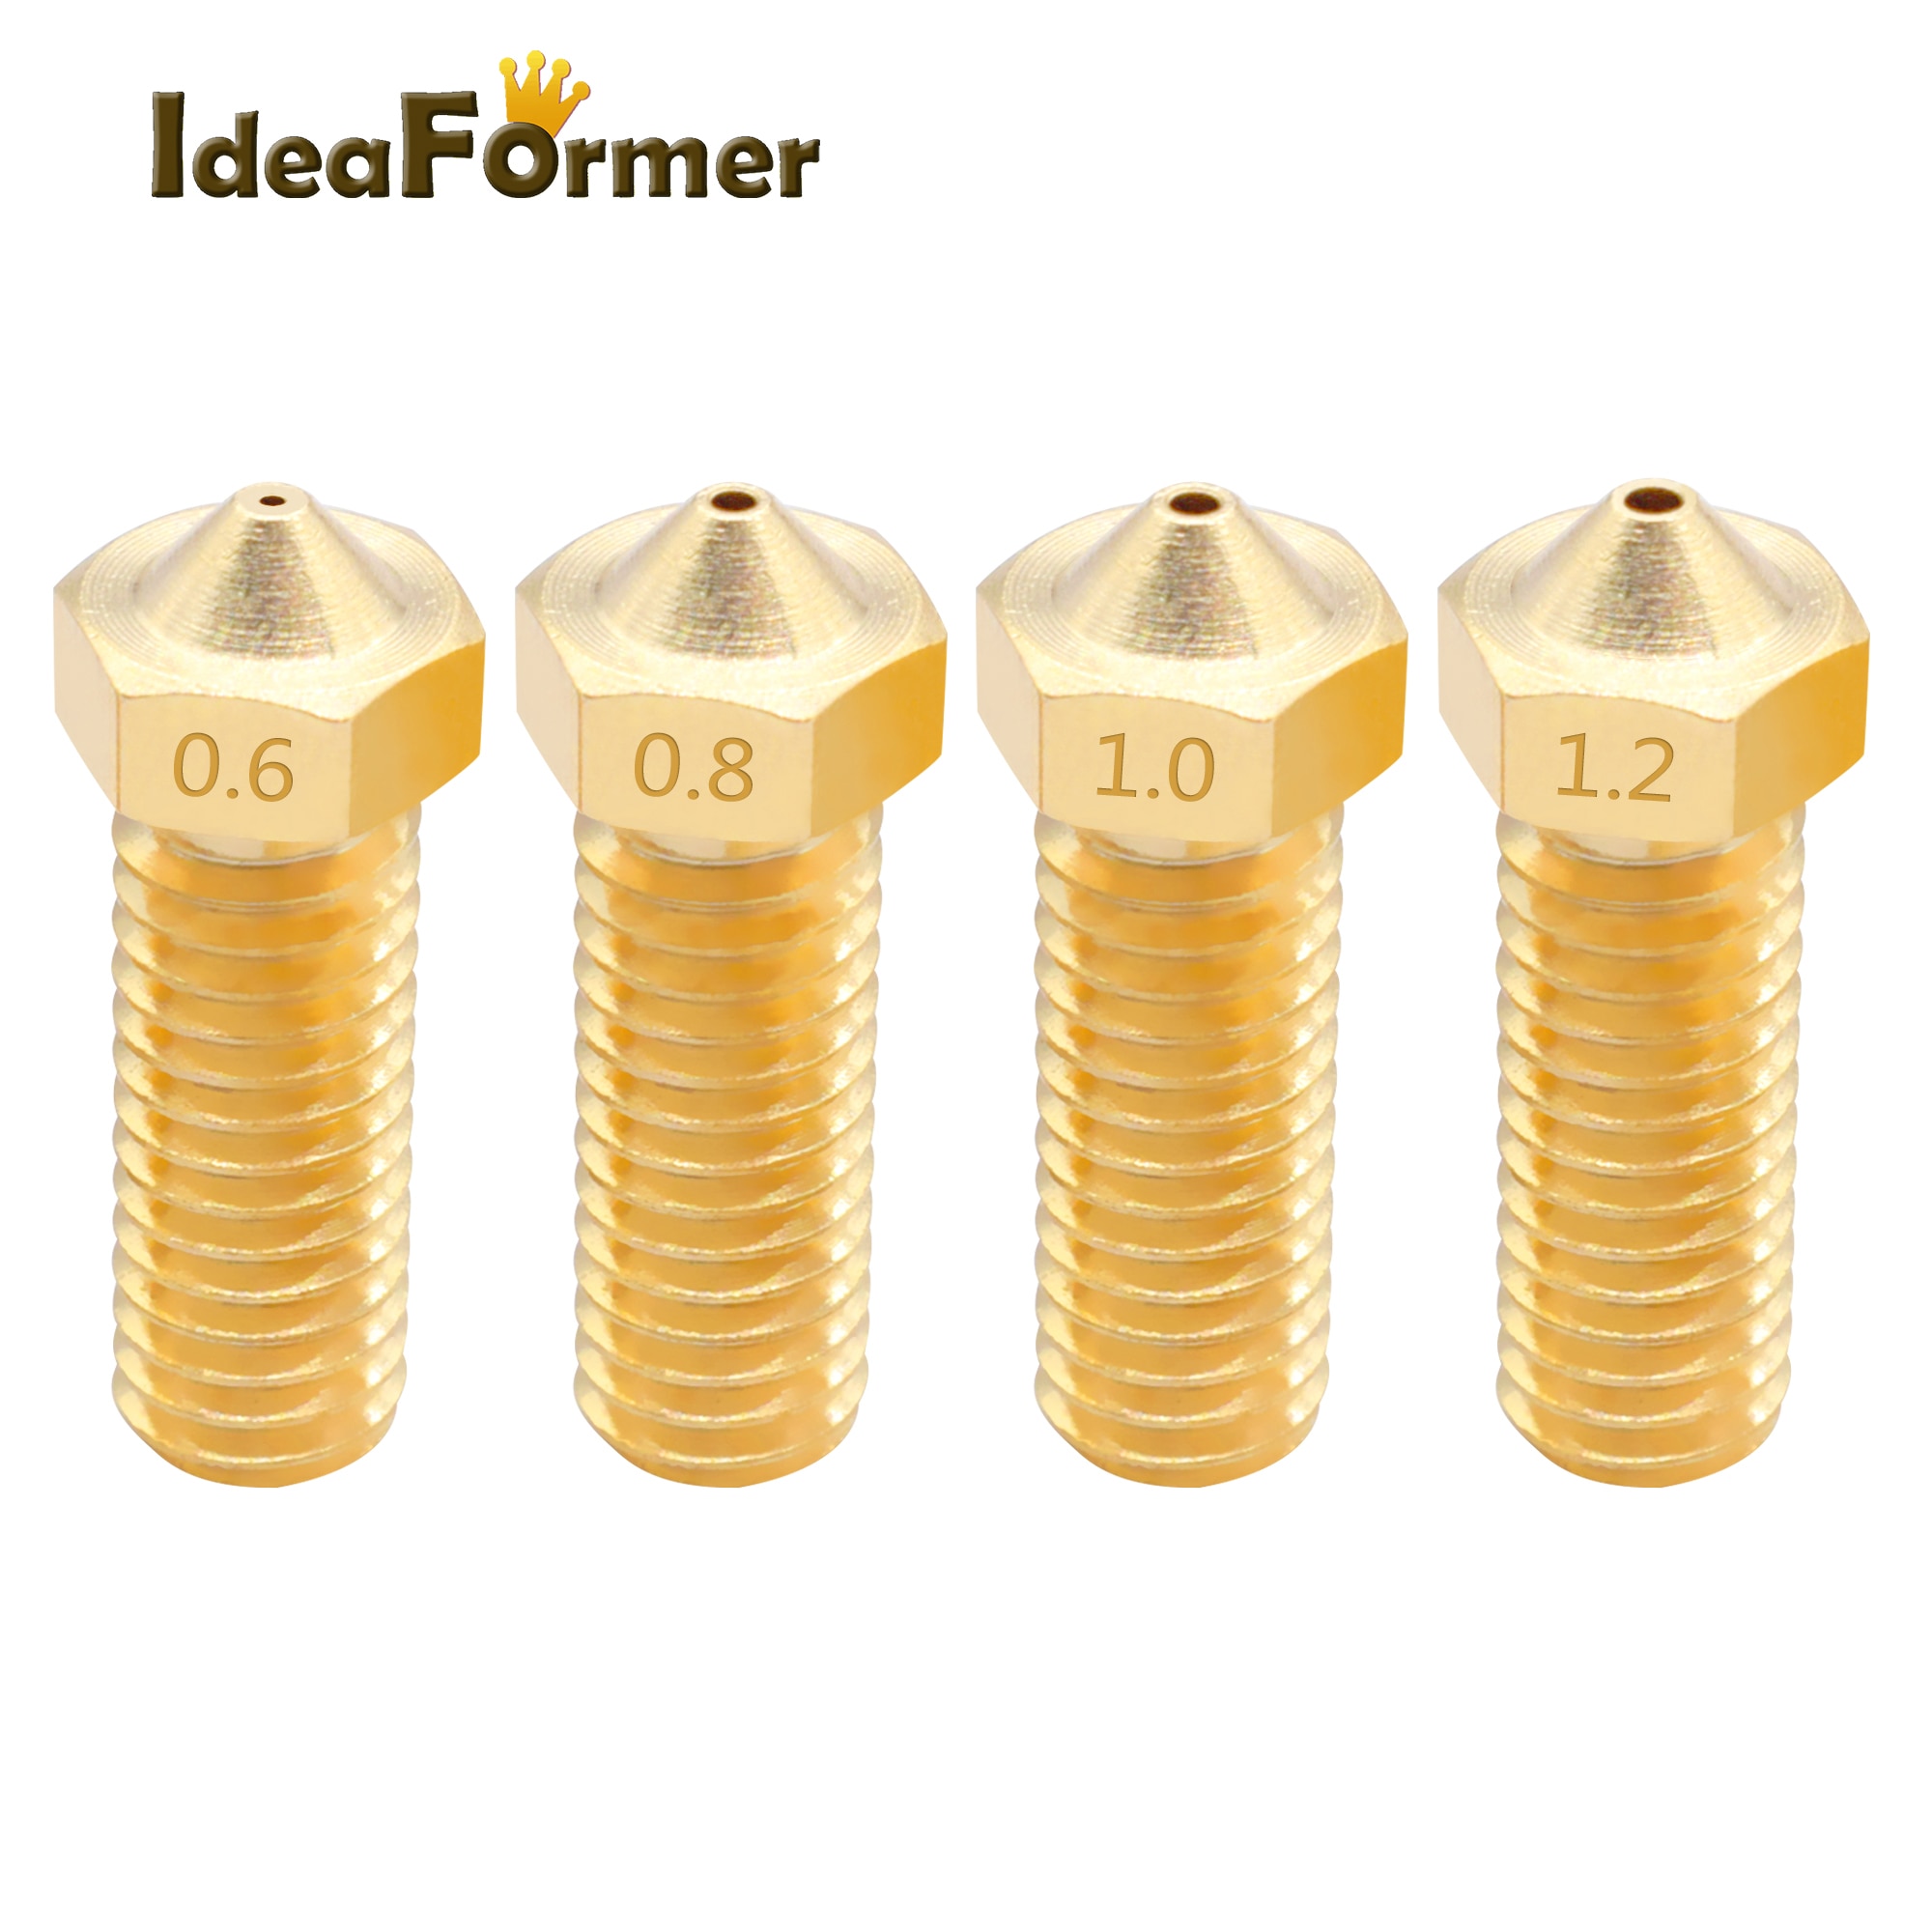 Ideaformer High Quality E3D Brass Volcano Nozzle M6 thread 0.4/0.6/0.8/1.0/1.2 mm 3D Printer Parts for J-Head hotend Extruder